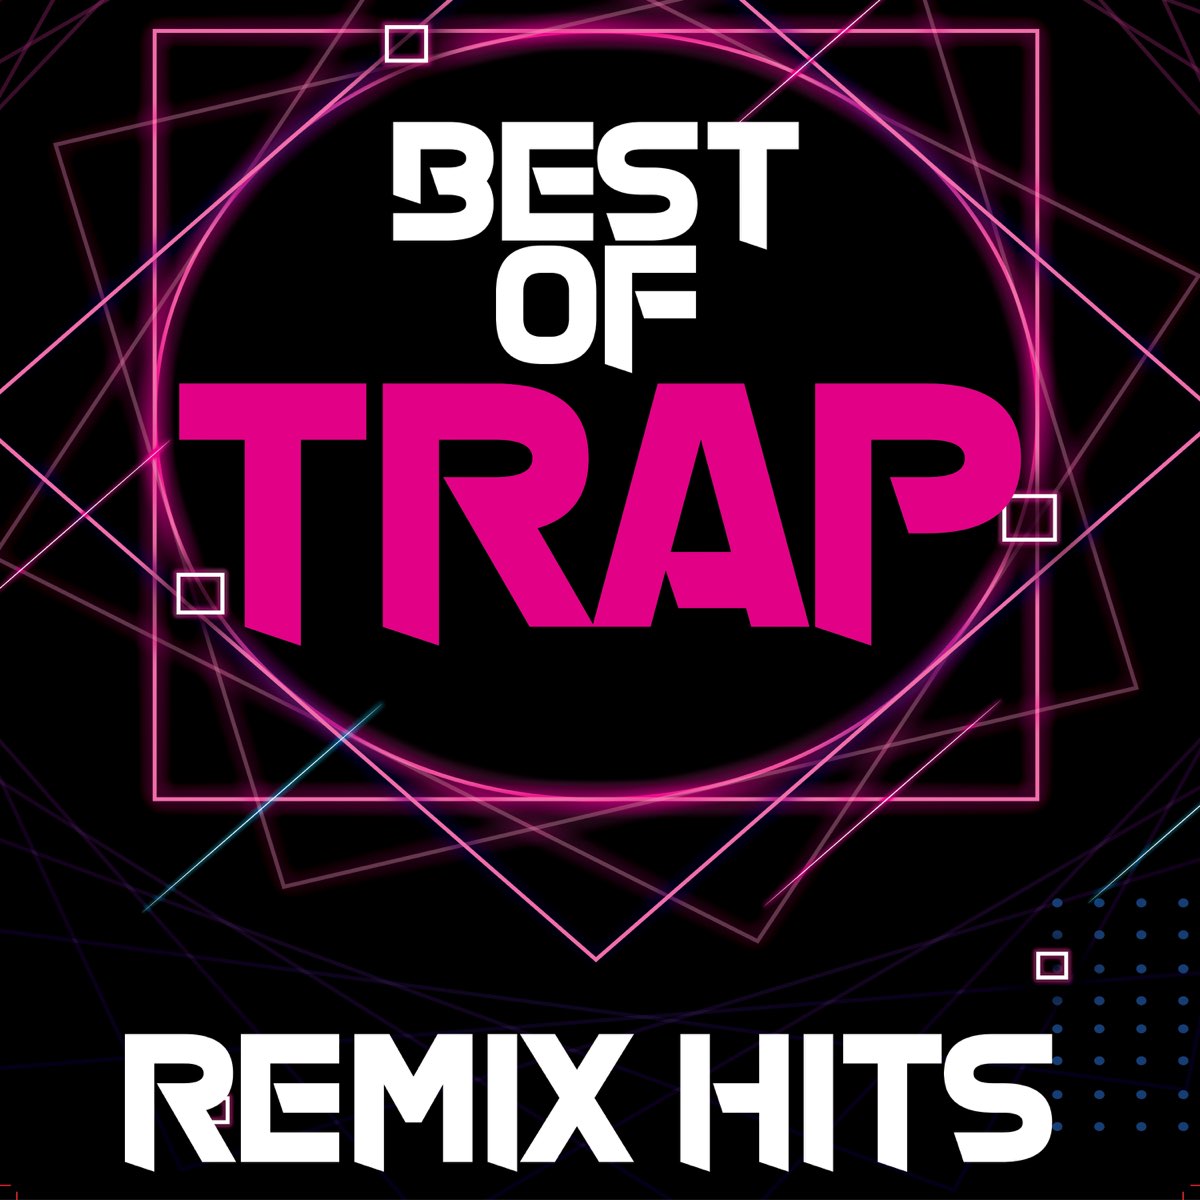 Best of Trap Remix Hits - Album by Trap Remix Guys - Apple Music